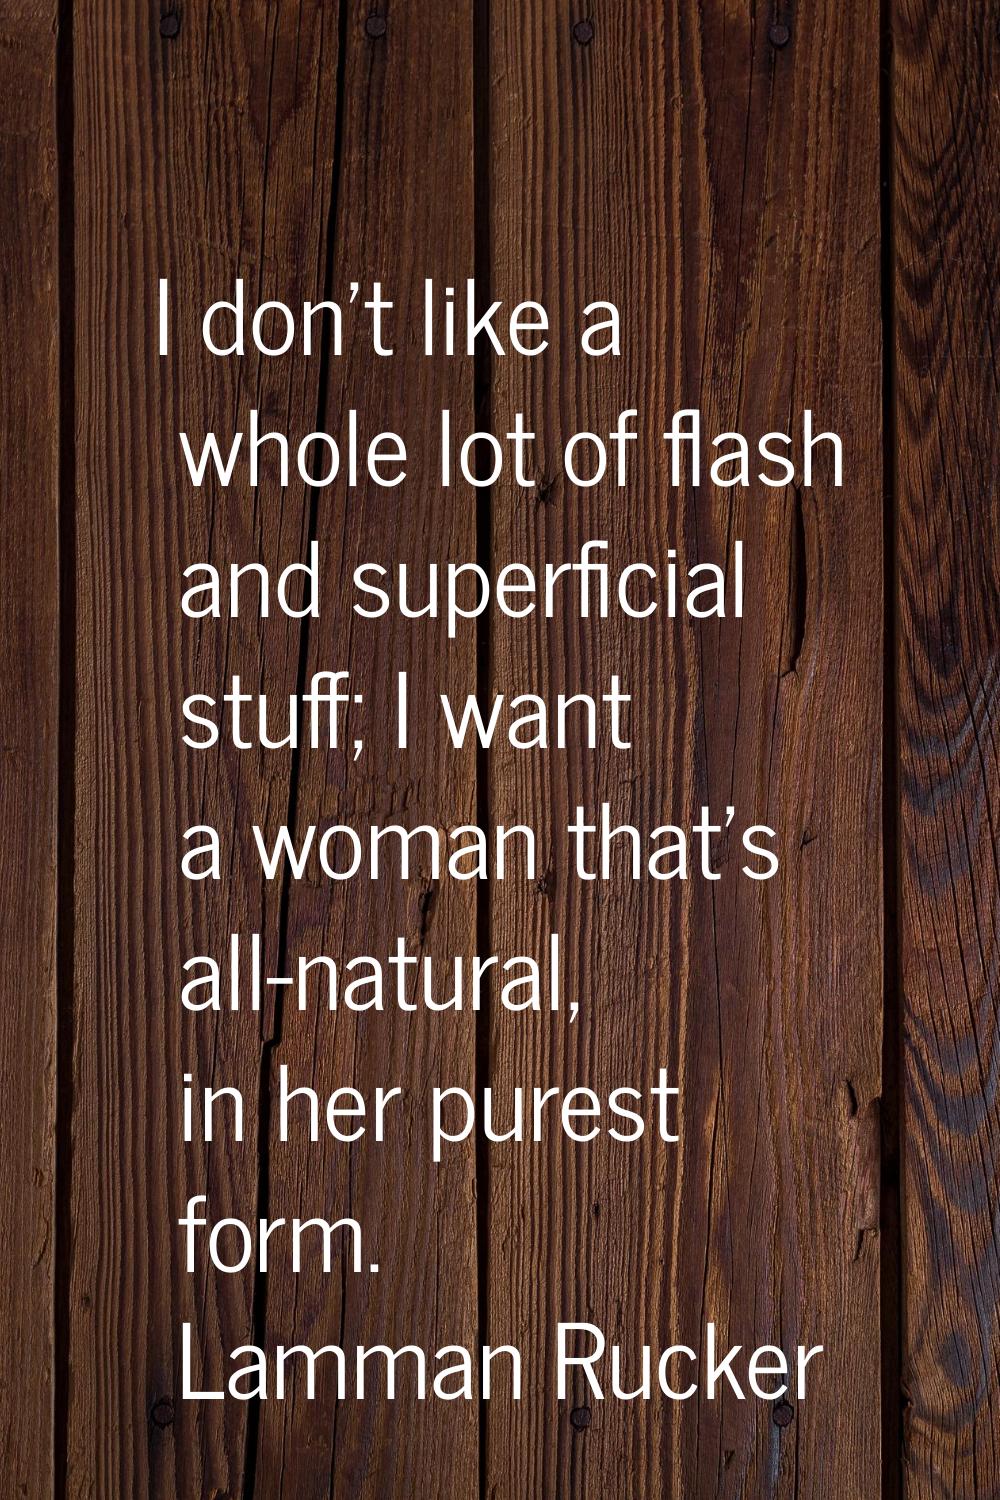 I don't like a whole lot of flash and superficial stuff; I want a woman that's all-natural, in her 